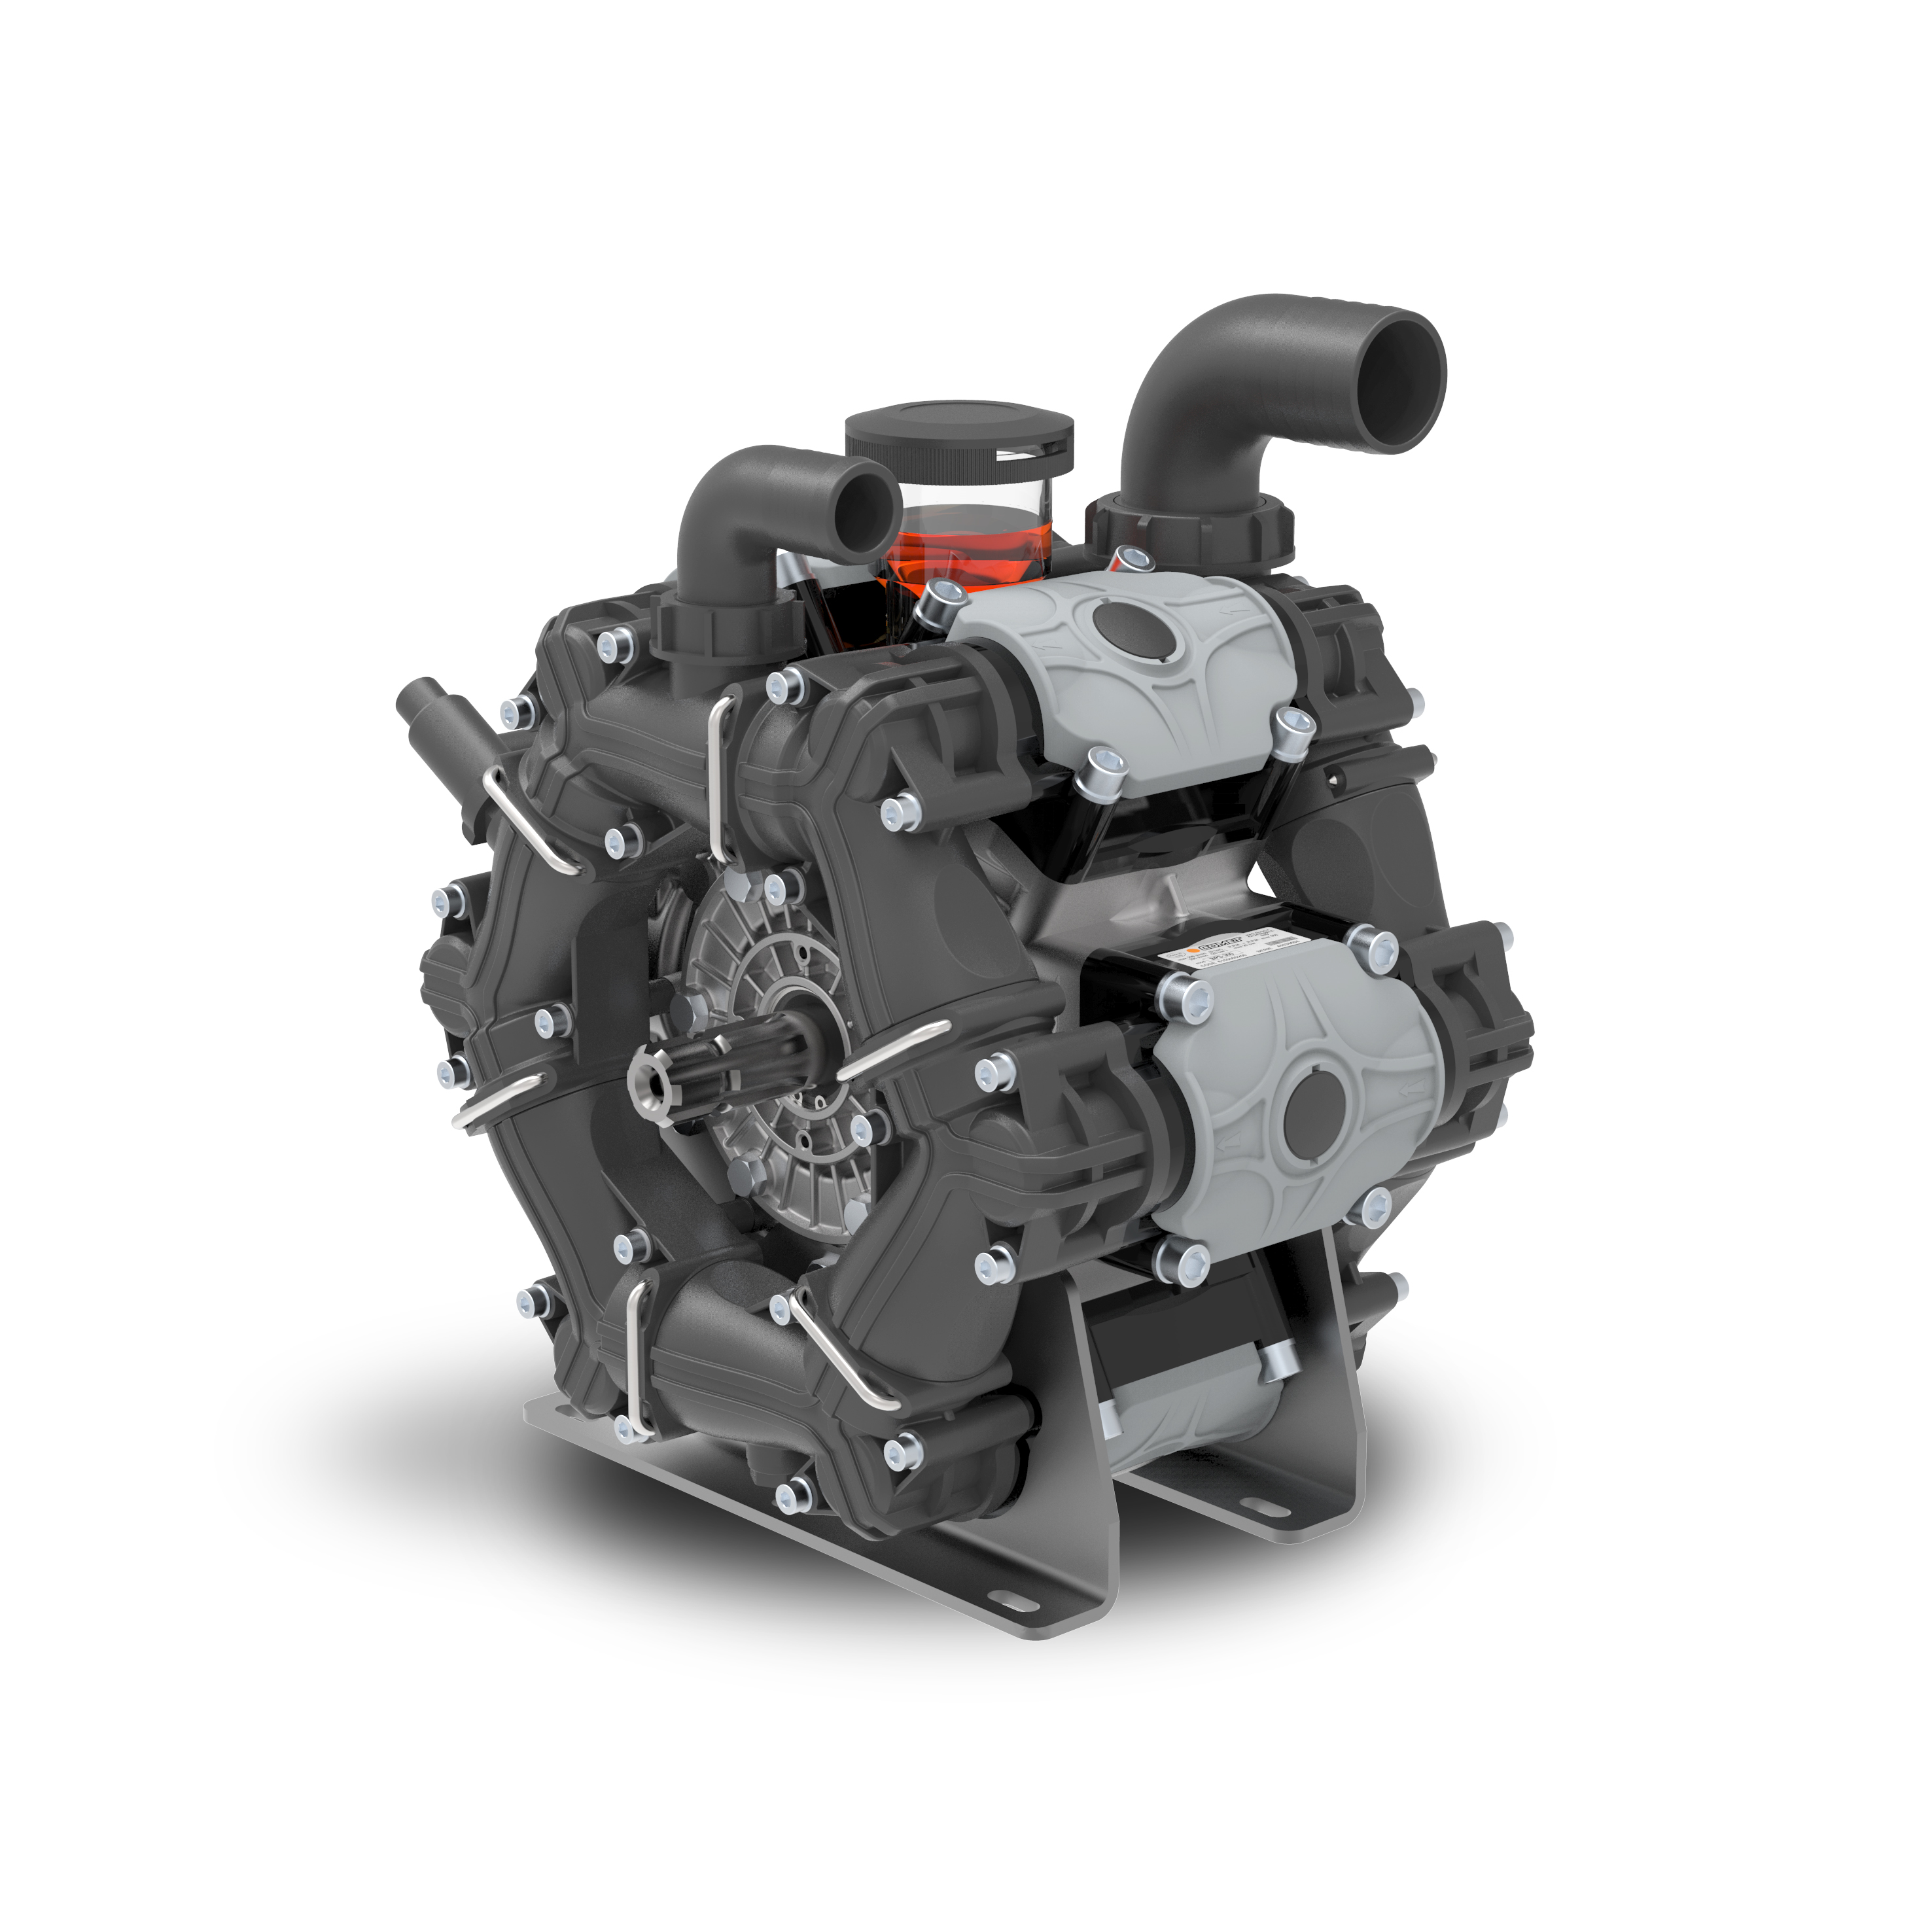 EVERYTHING YOU NEED TO KNOW ABOUT DIAPHRAGM PUMPS